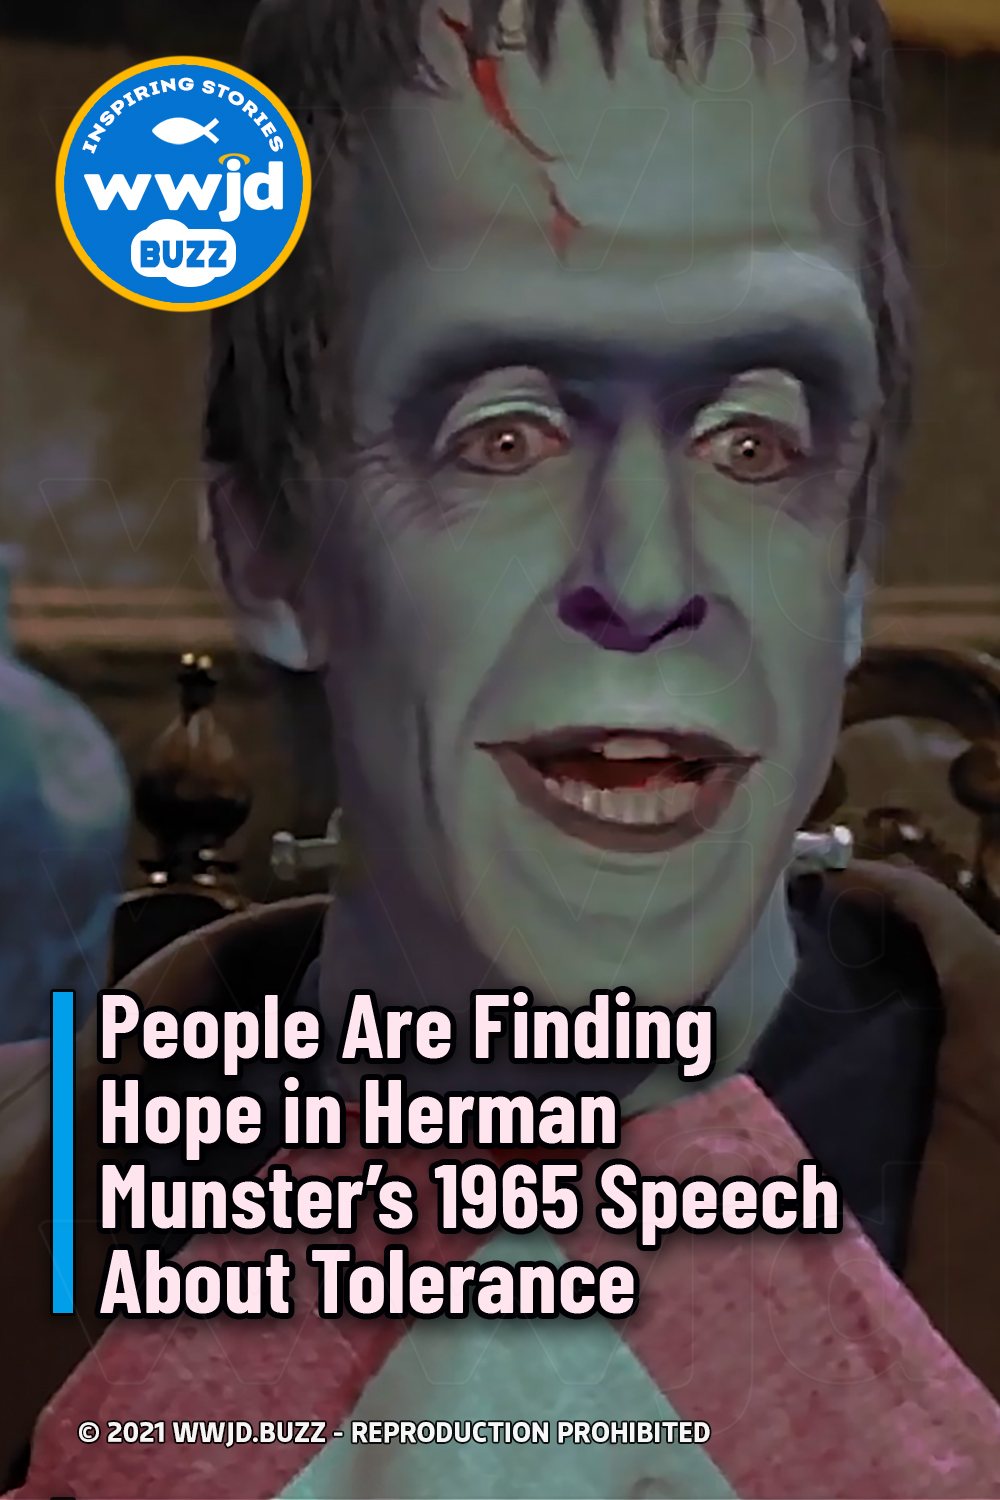 People Are Finding Hope in Herman Munster’s 1965 Speech About Tolerance